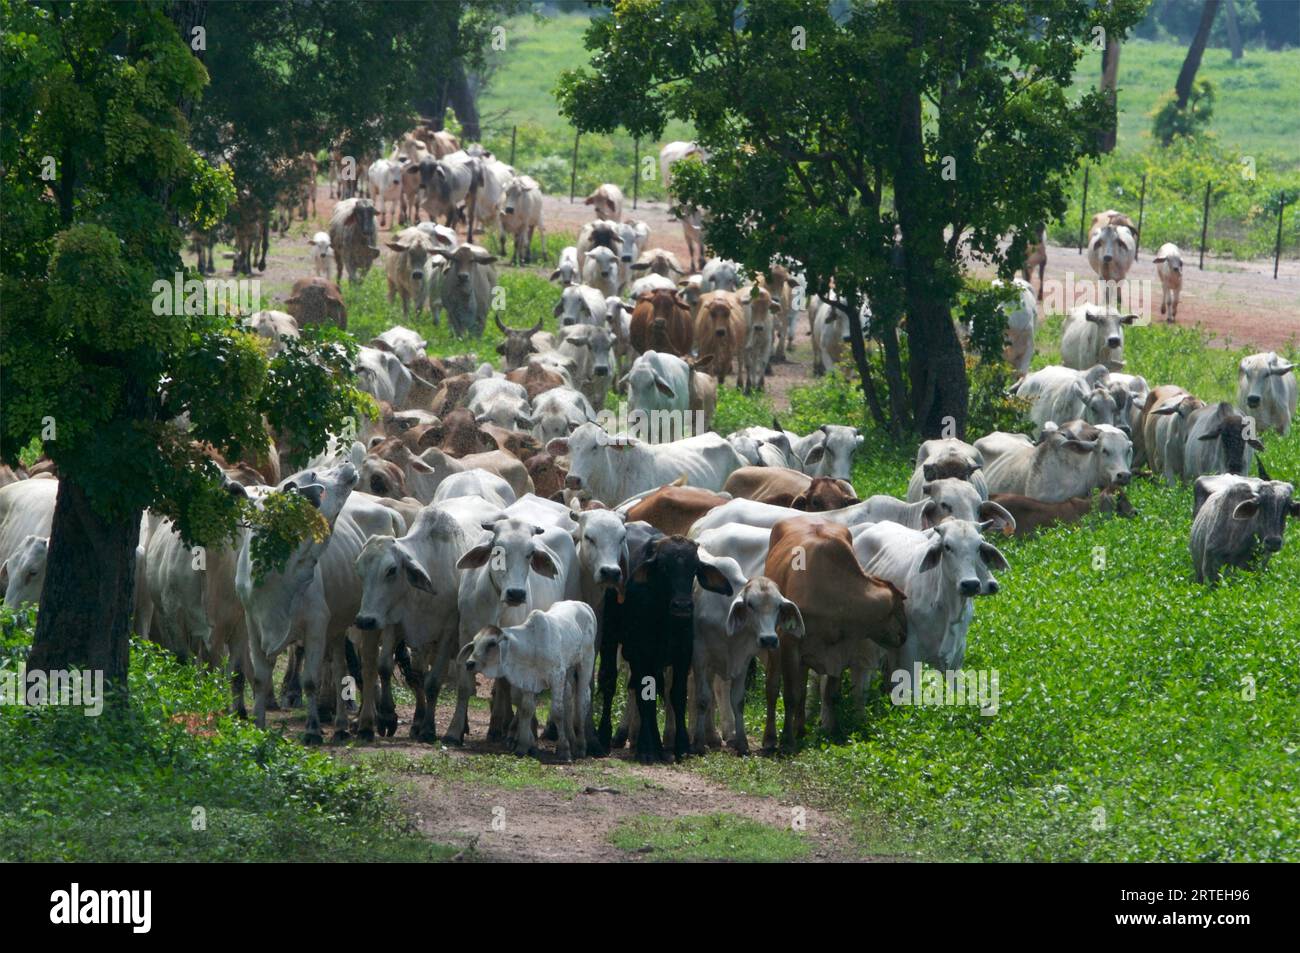 Cattle on a ranch moving to higher ground before heavy rains; Australia Stock Photo